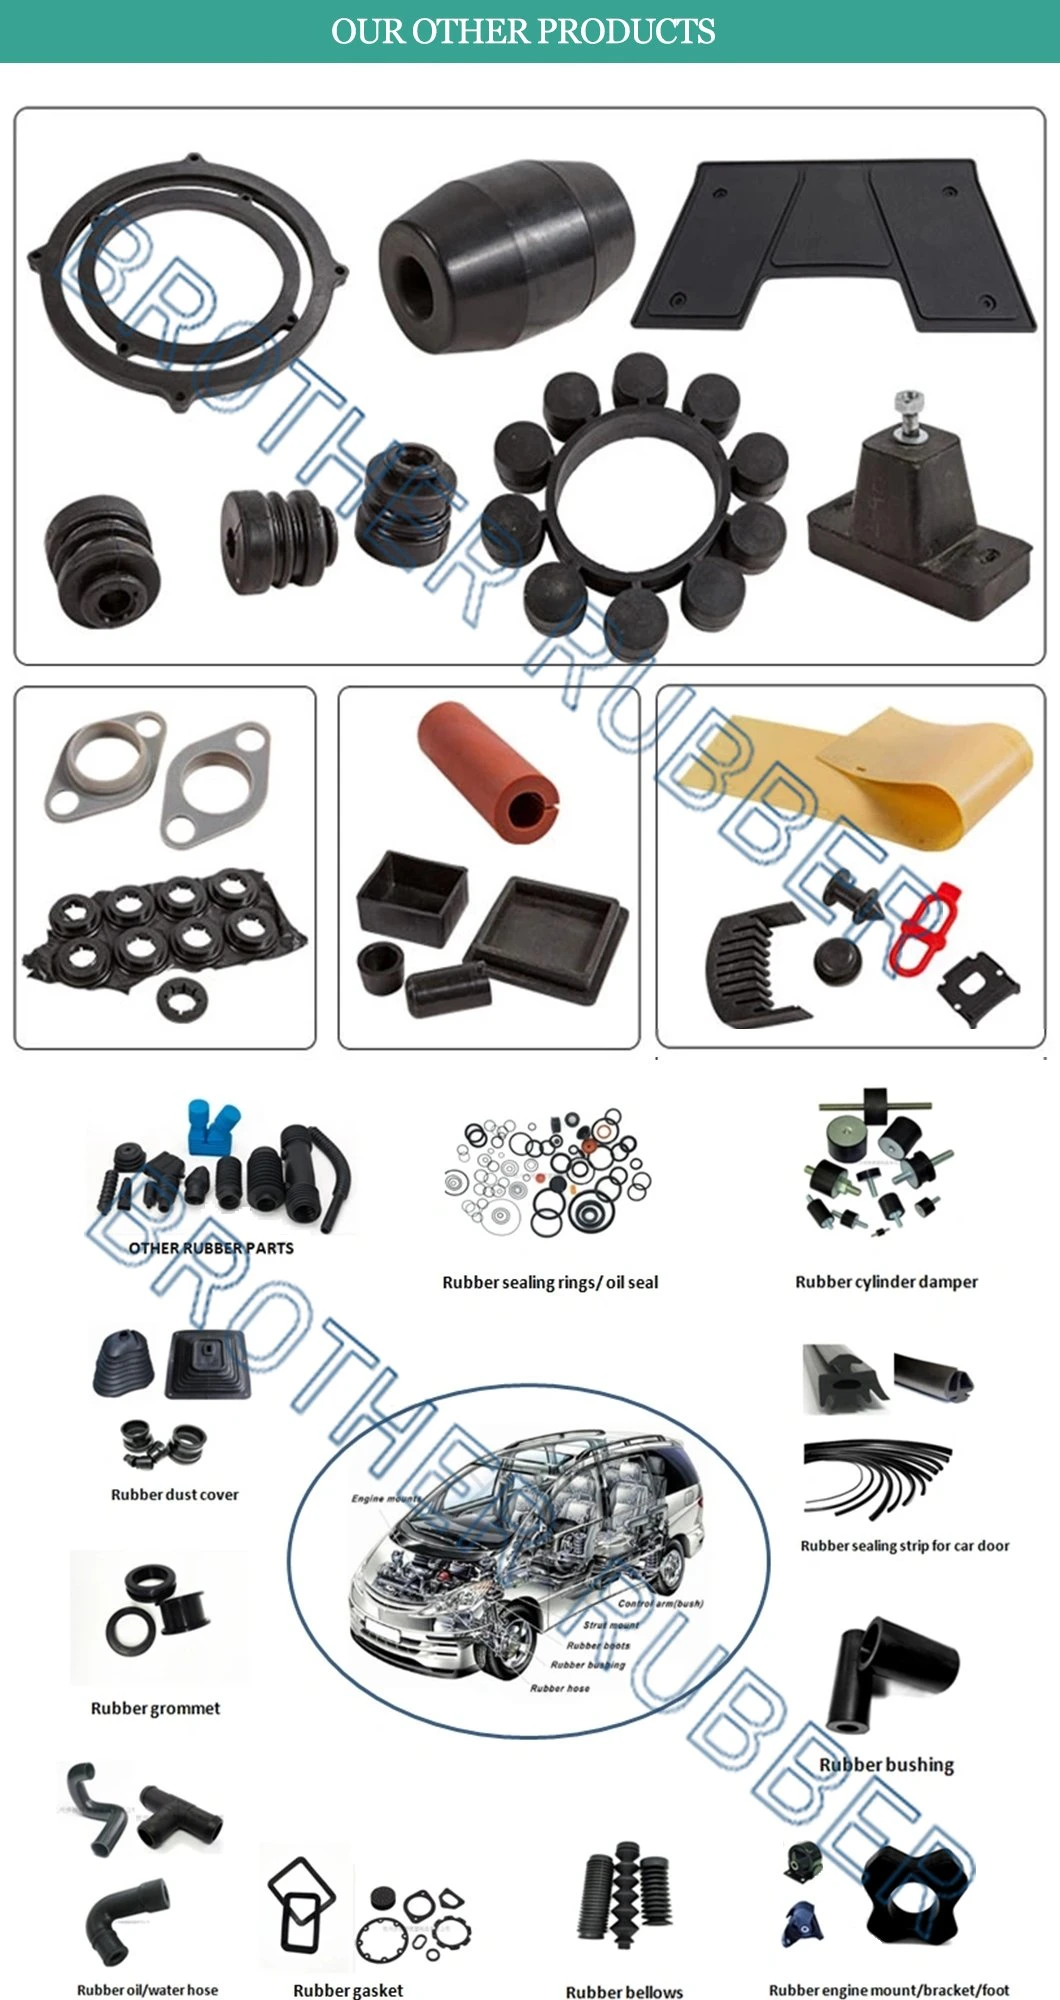 Factory Customized Silicone to Metal Bonded Bushes, Rubber to Metal Bonded Bushing